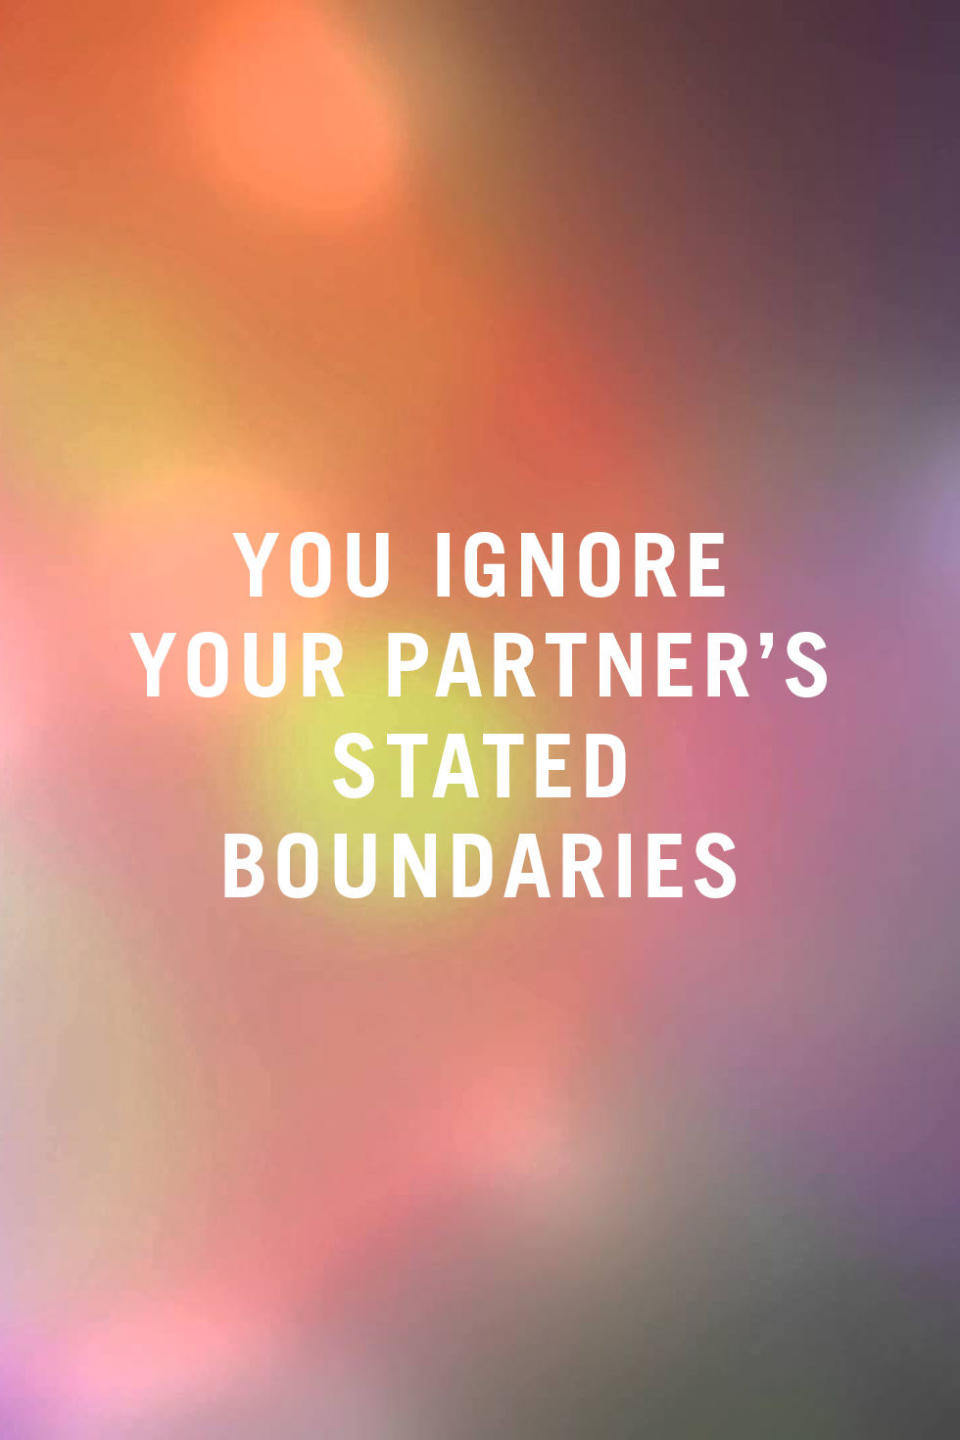 <p>"When there is a defined boundary in the relationship, you sabotage yourself when you break it. Even if you apologize, if you continue to set yourself up to break this boundary it shows you don't care much about your partner's feelings." —<em>Simonsen</em></p>